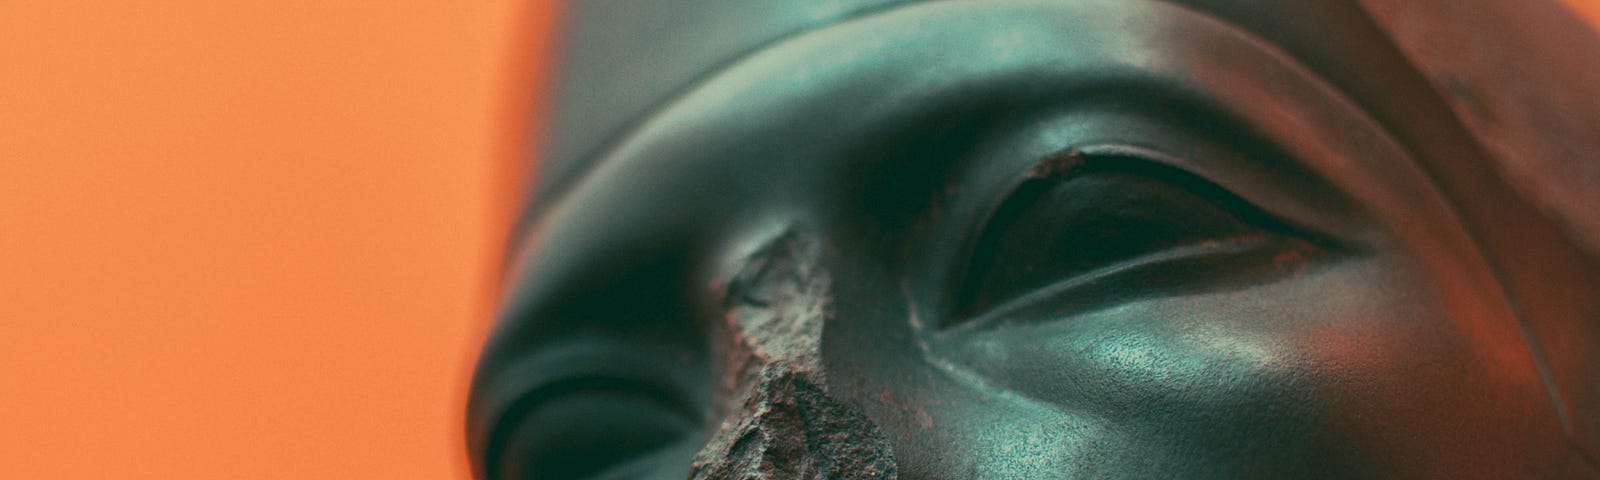 An ancient black statue of a person’s face, the nose having fallen off. Inhaling menthol improves cognitive function in animal models of Alzheimer’s dementia.